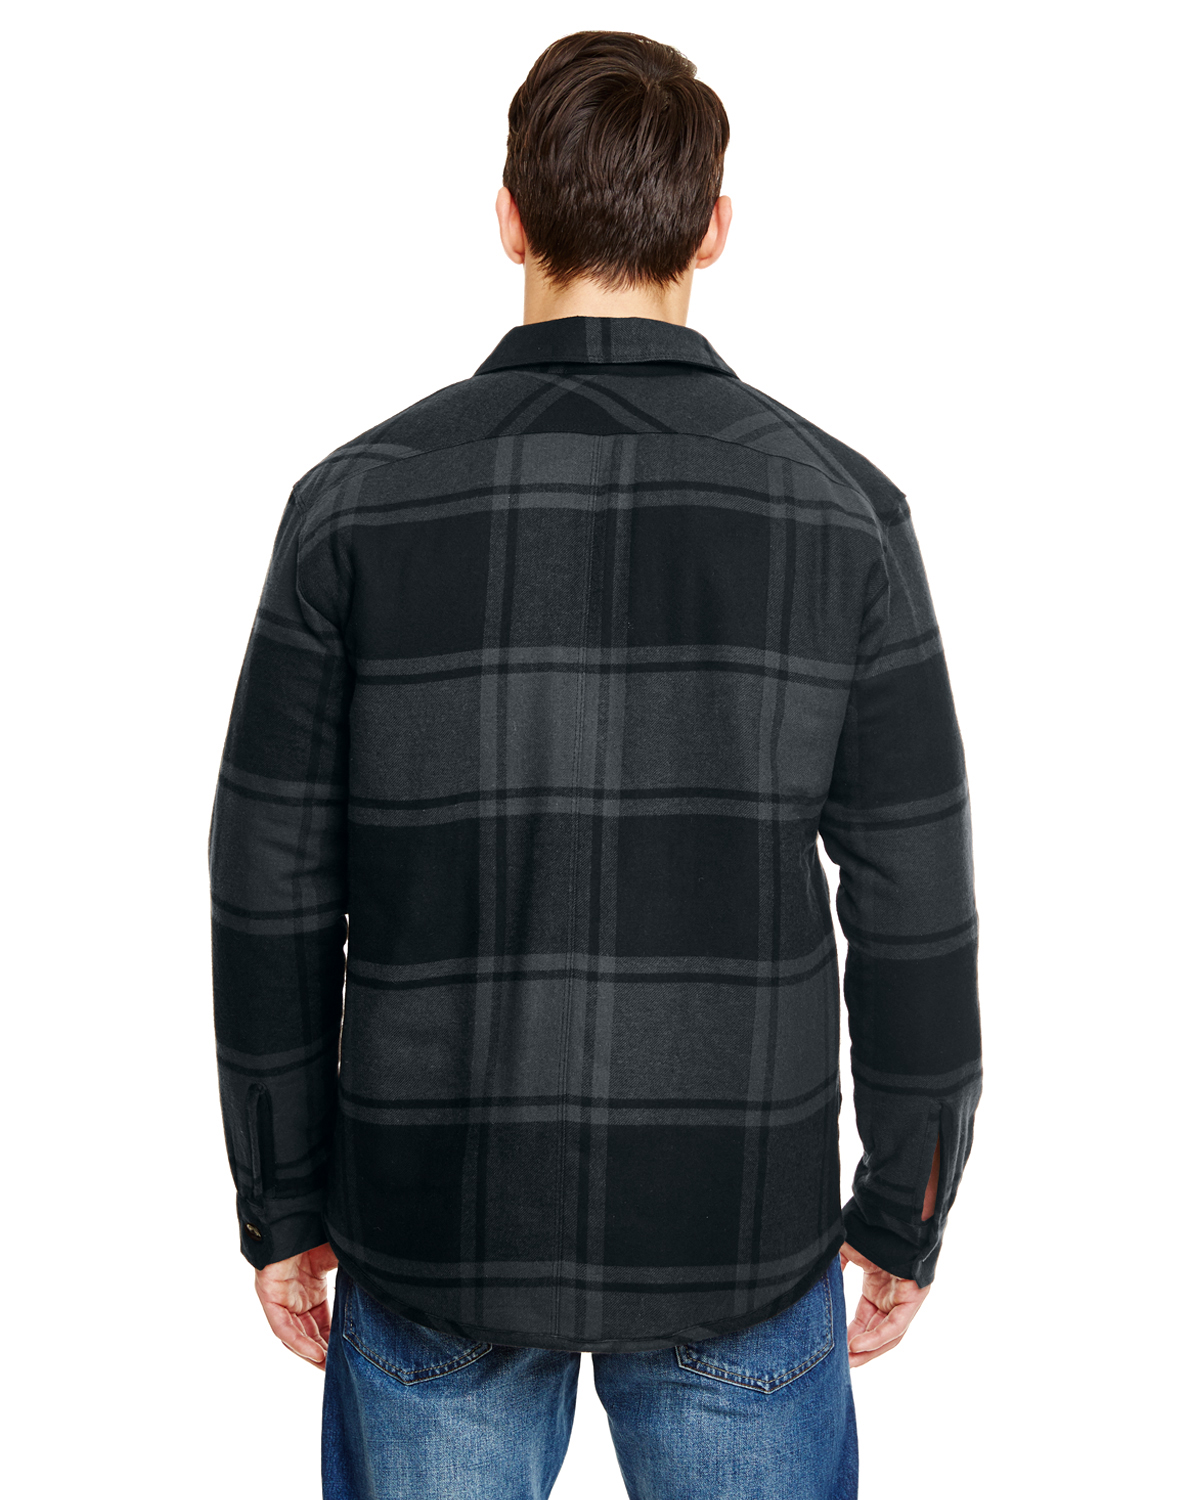 Burnside B8610 | Adult Quilted Flannel Jacket | ShirtSpace